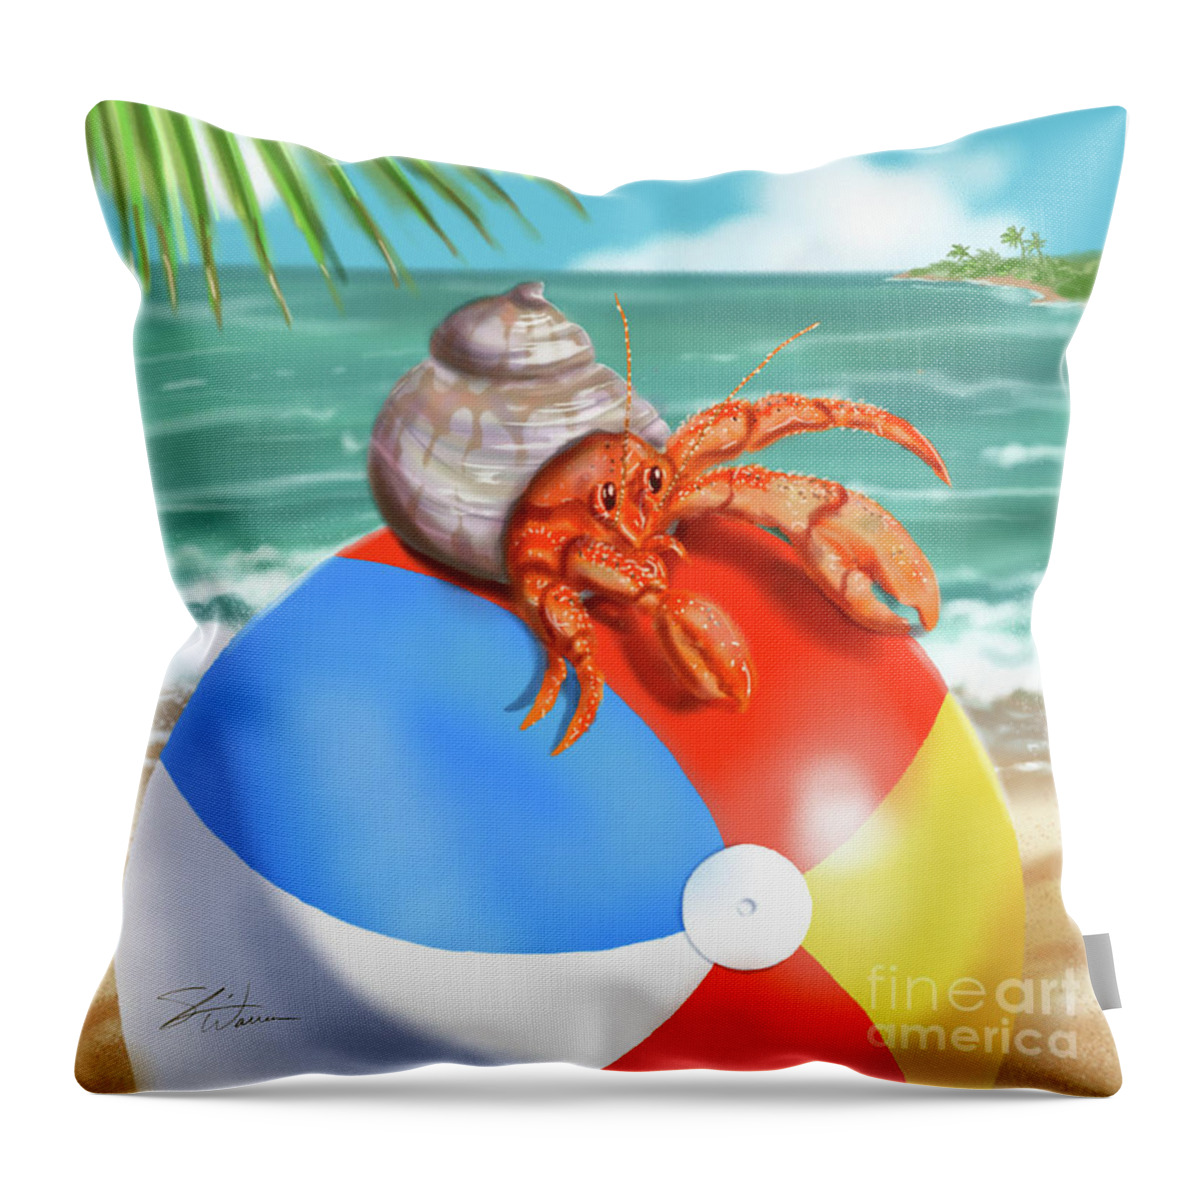 Crab Throw Pillow featuring the mixed media Hermit Crab on a Beachball by Shari Warren